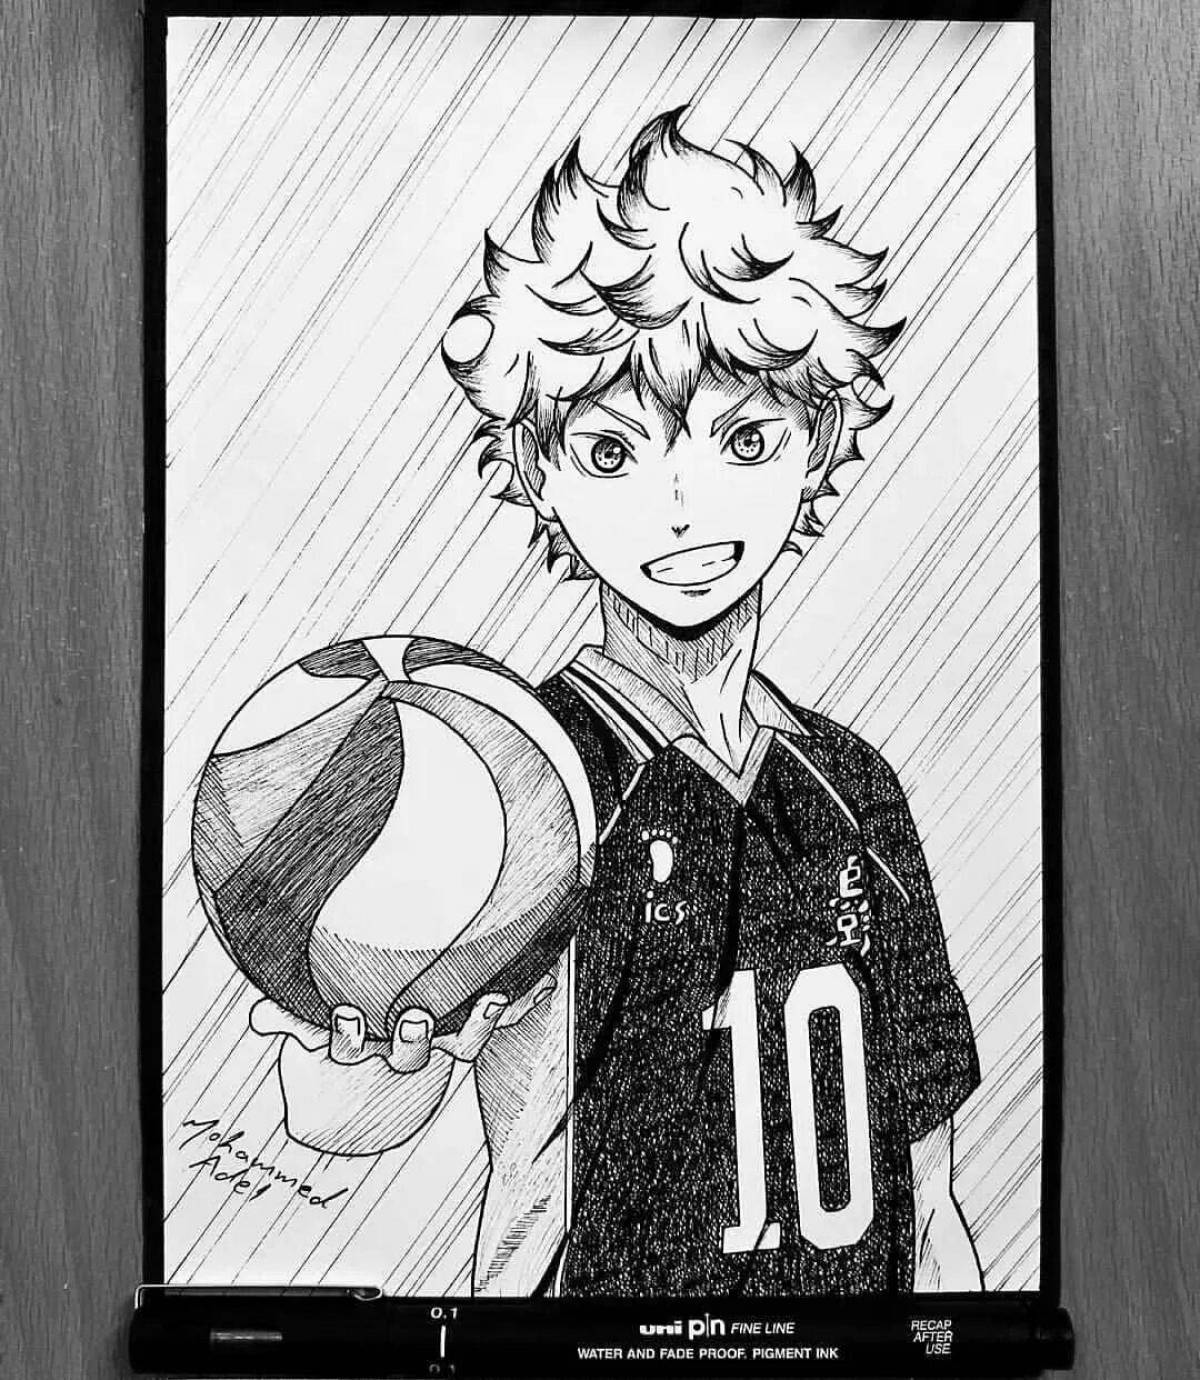 Hinata's fancy volleyball coloring book